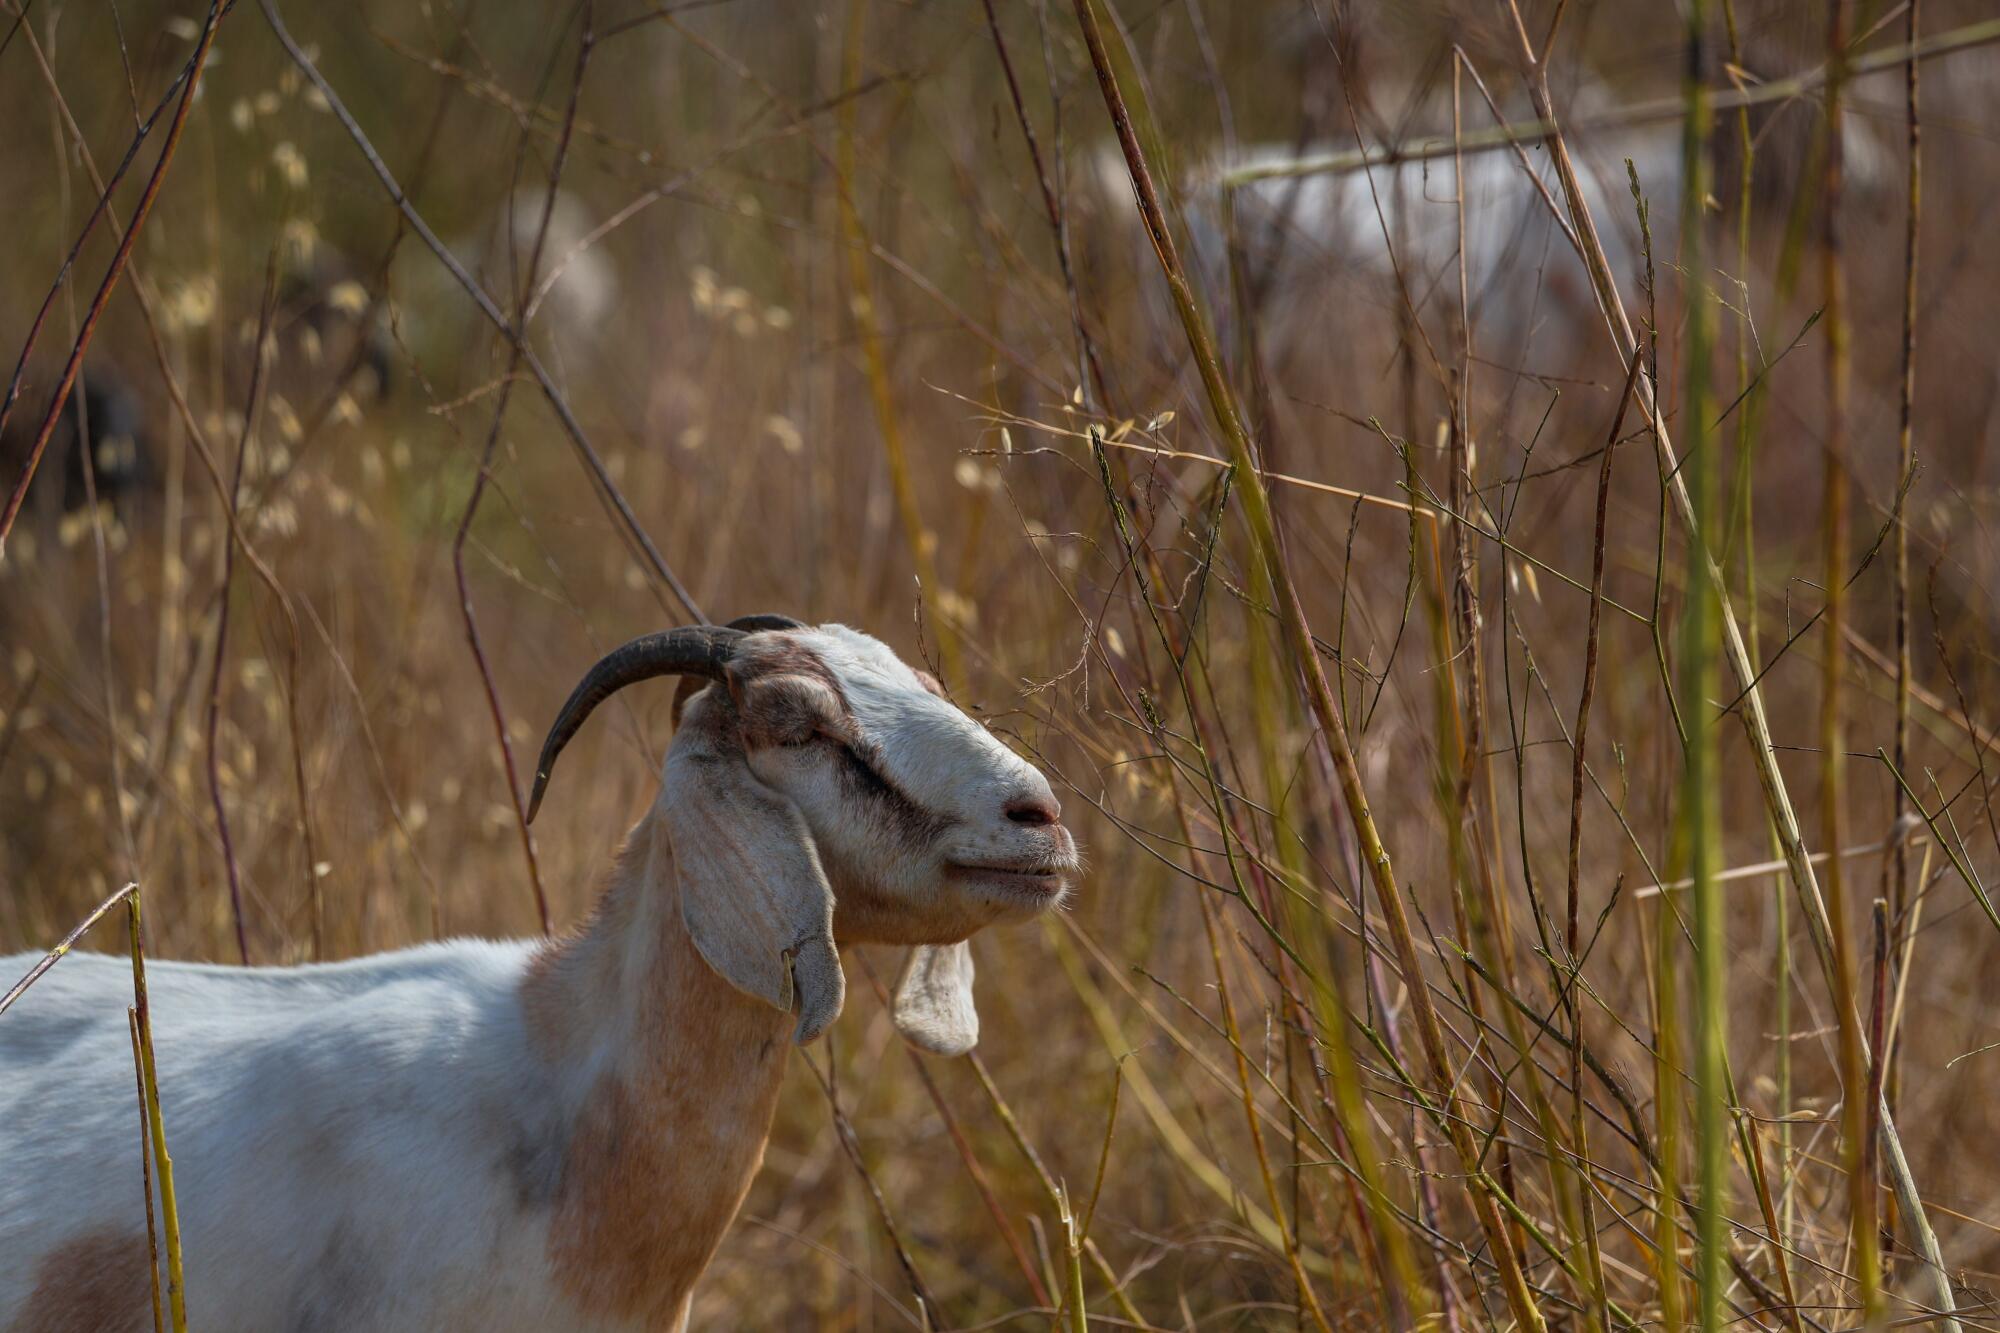 A goat with horns stands amid weeds.